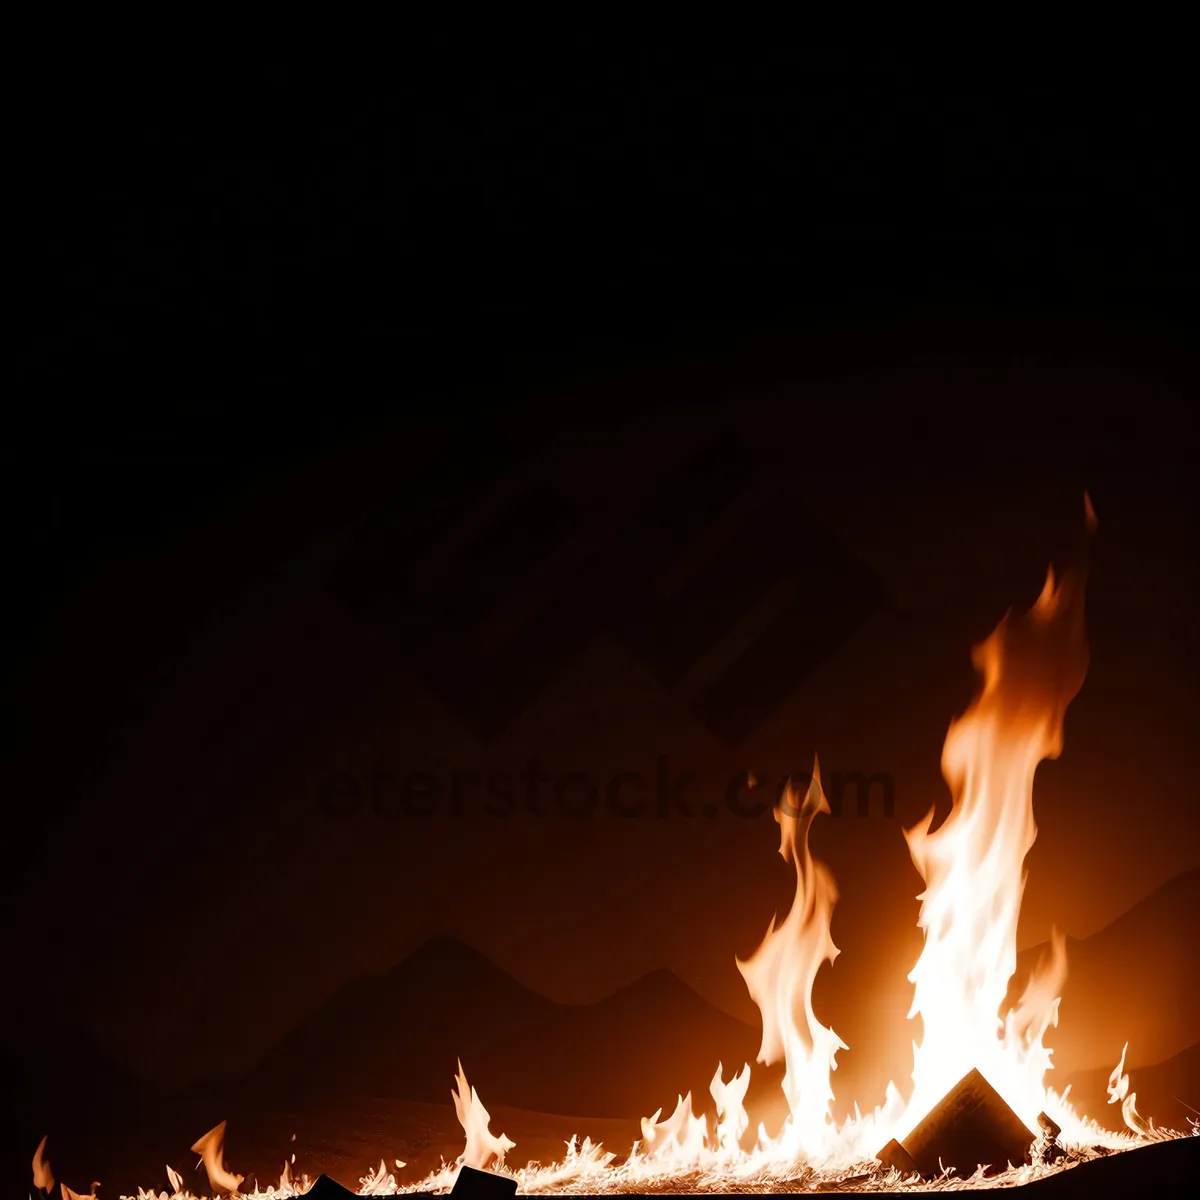 Picture of Fiery Inferno: Blazing Campfire's Glowing Heat